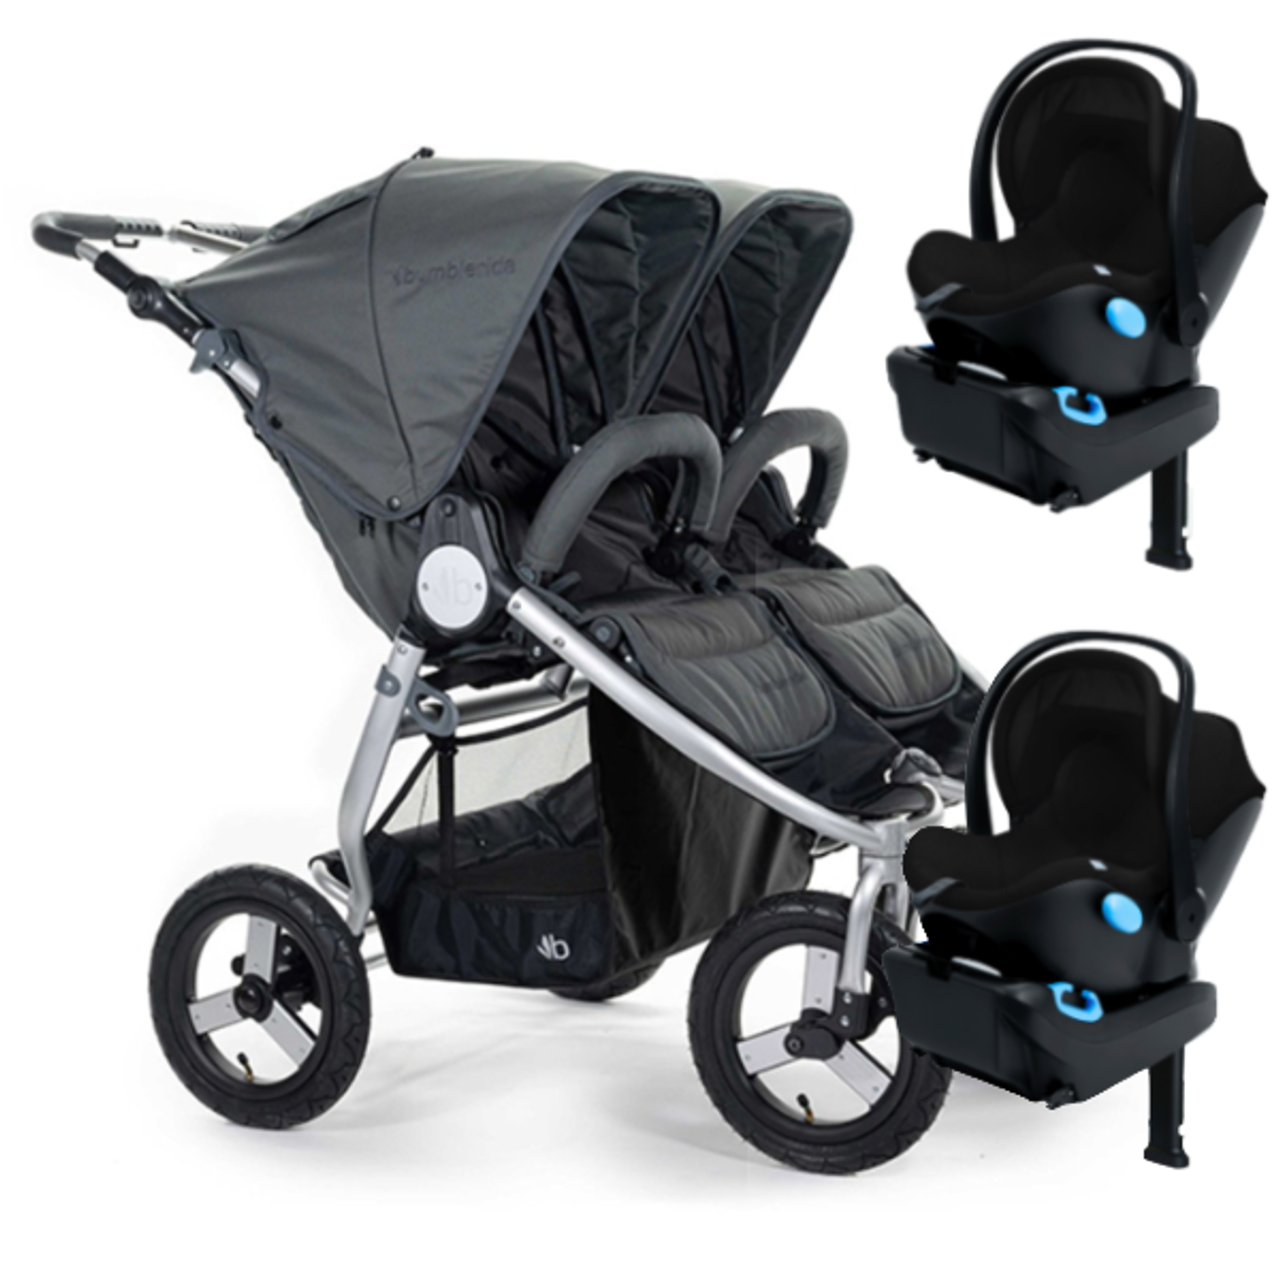 Bumbleride Indie Twin Stroller Travel System